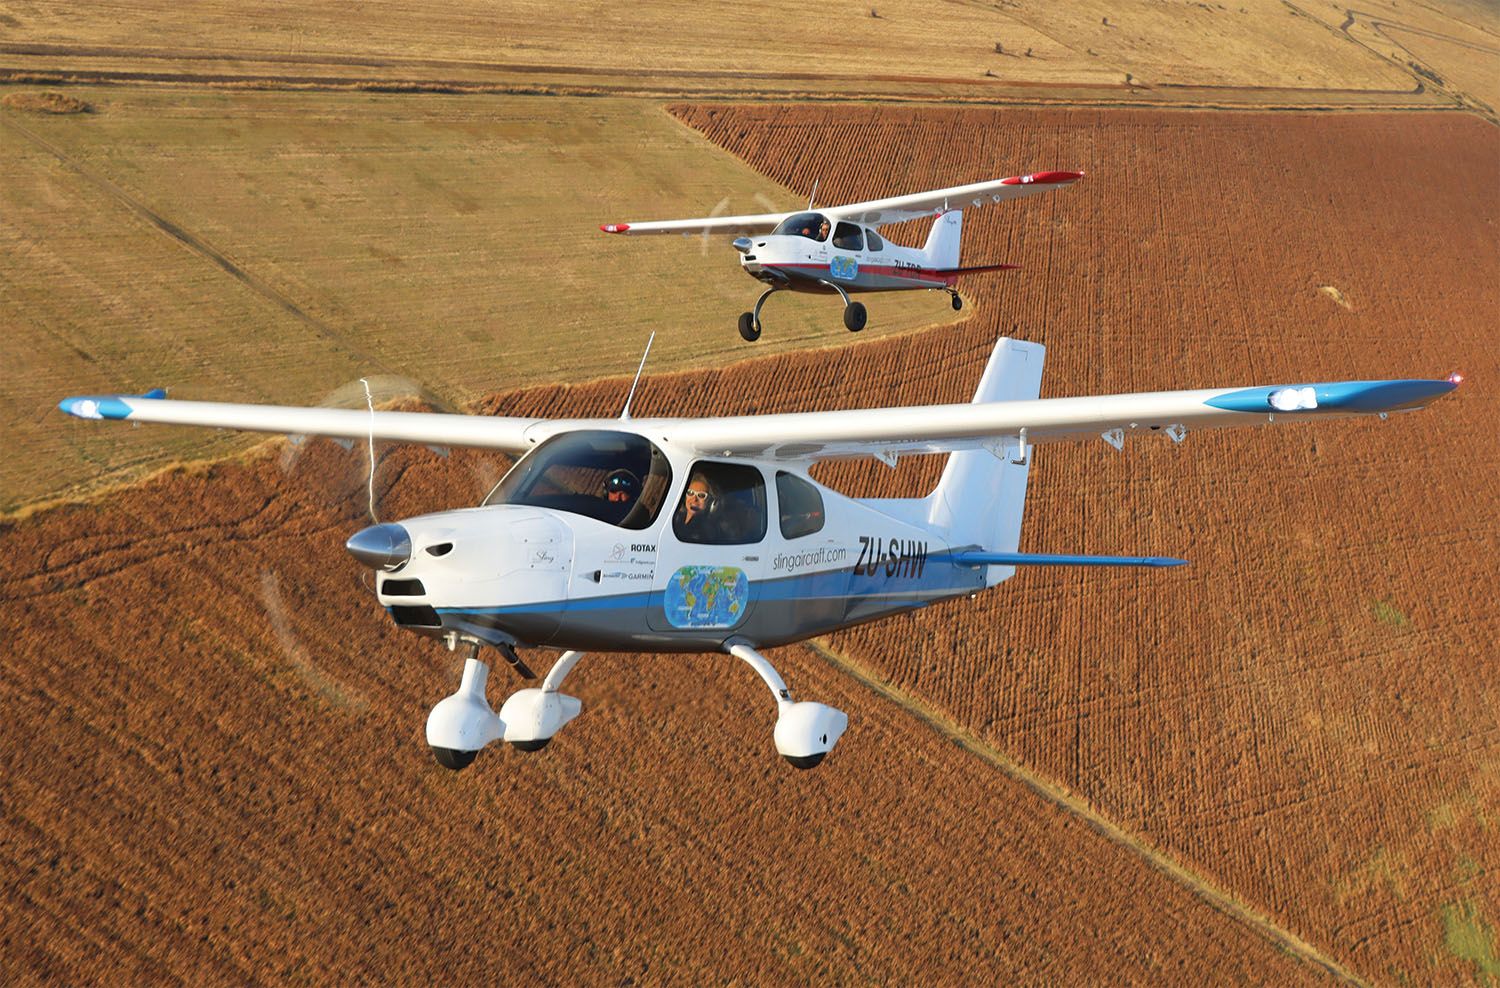 Sling 2 Light-Sport Aircraft or Sling 4 light aircraft kits — Buy and Save  Now 